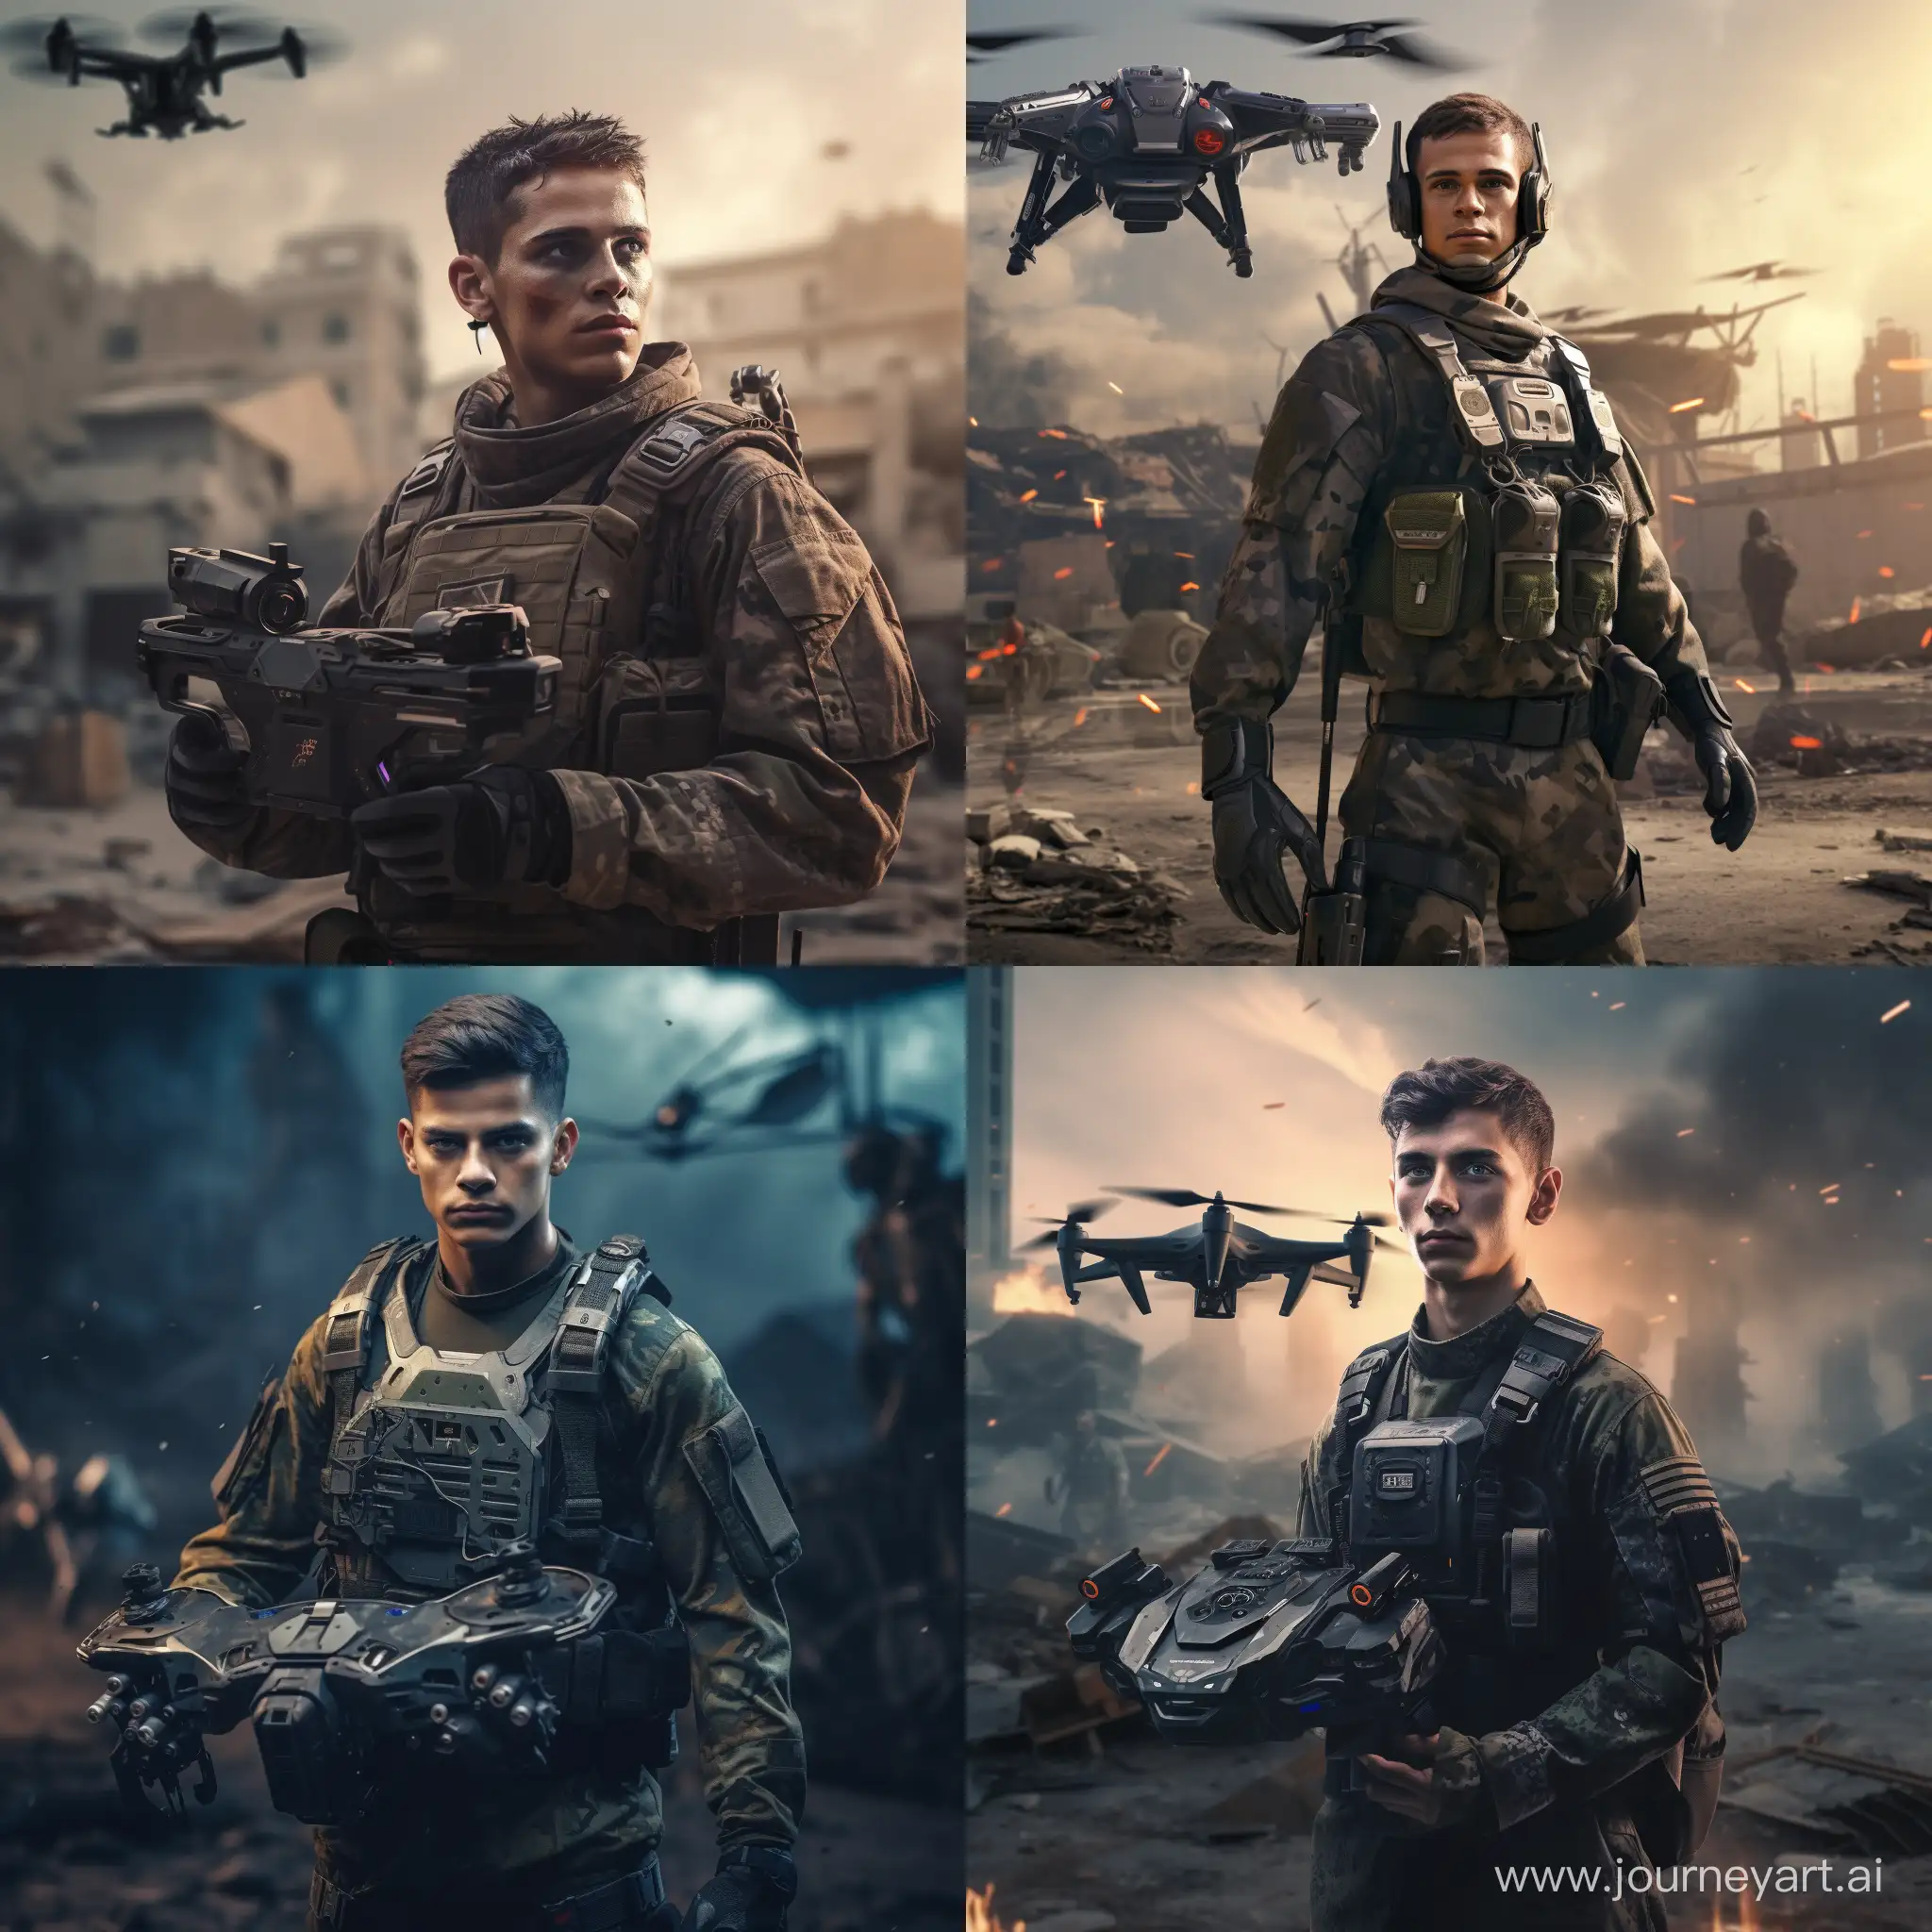 A soldier of the future with a drone in his hand